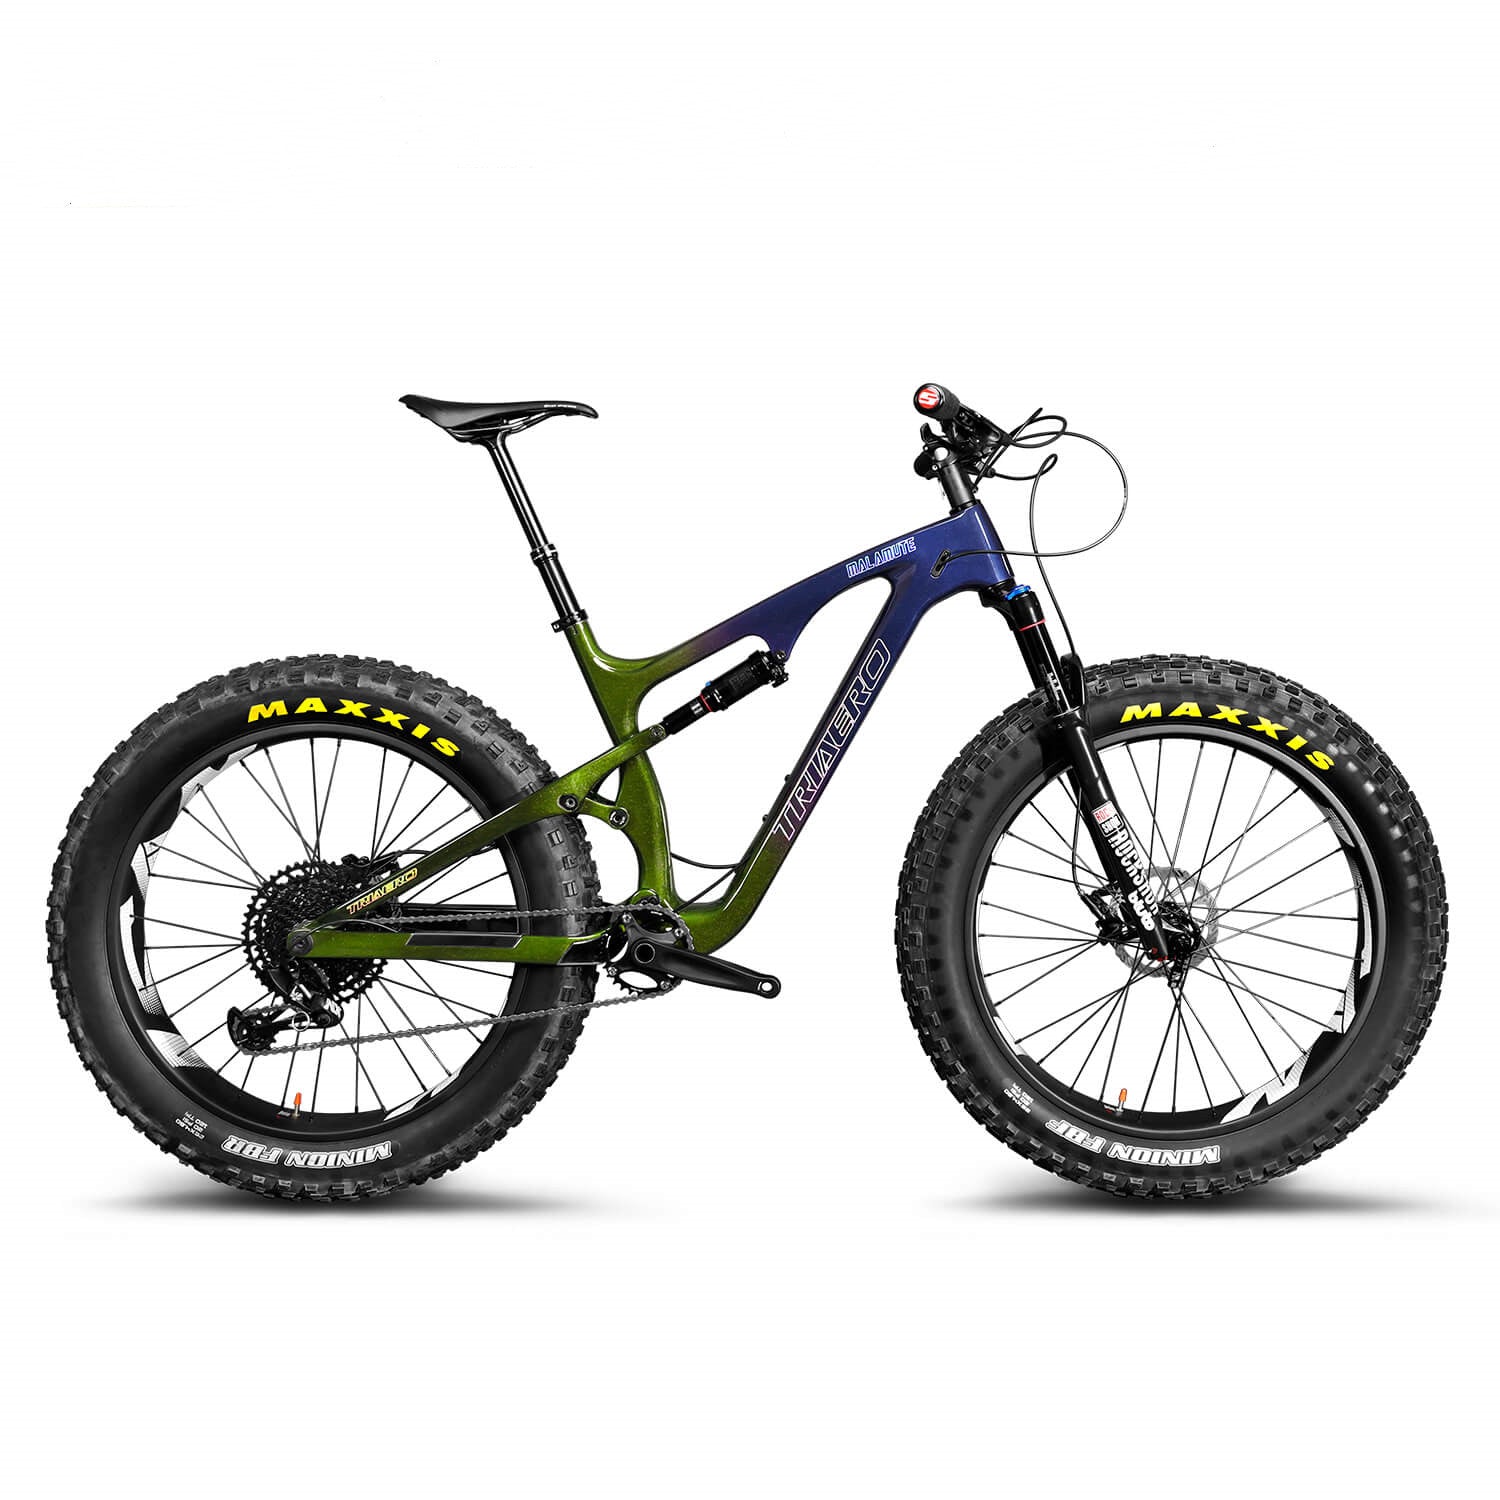 Hardtail vs Full Suspension: Which Is Right For You – ICAN Cycling